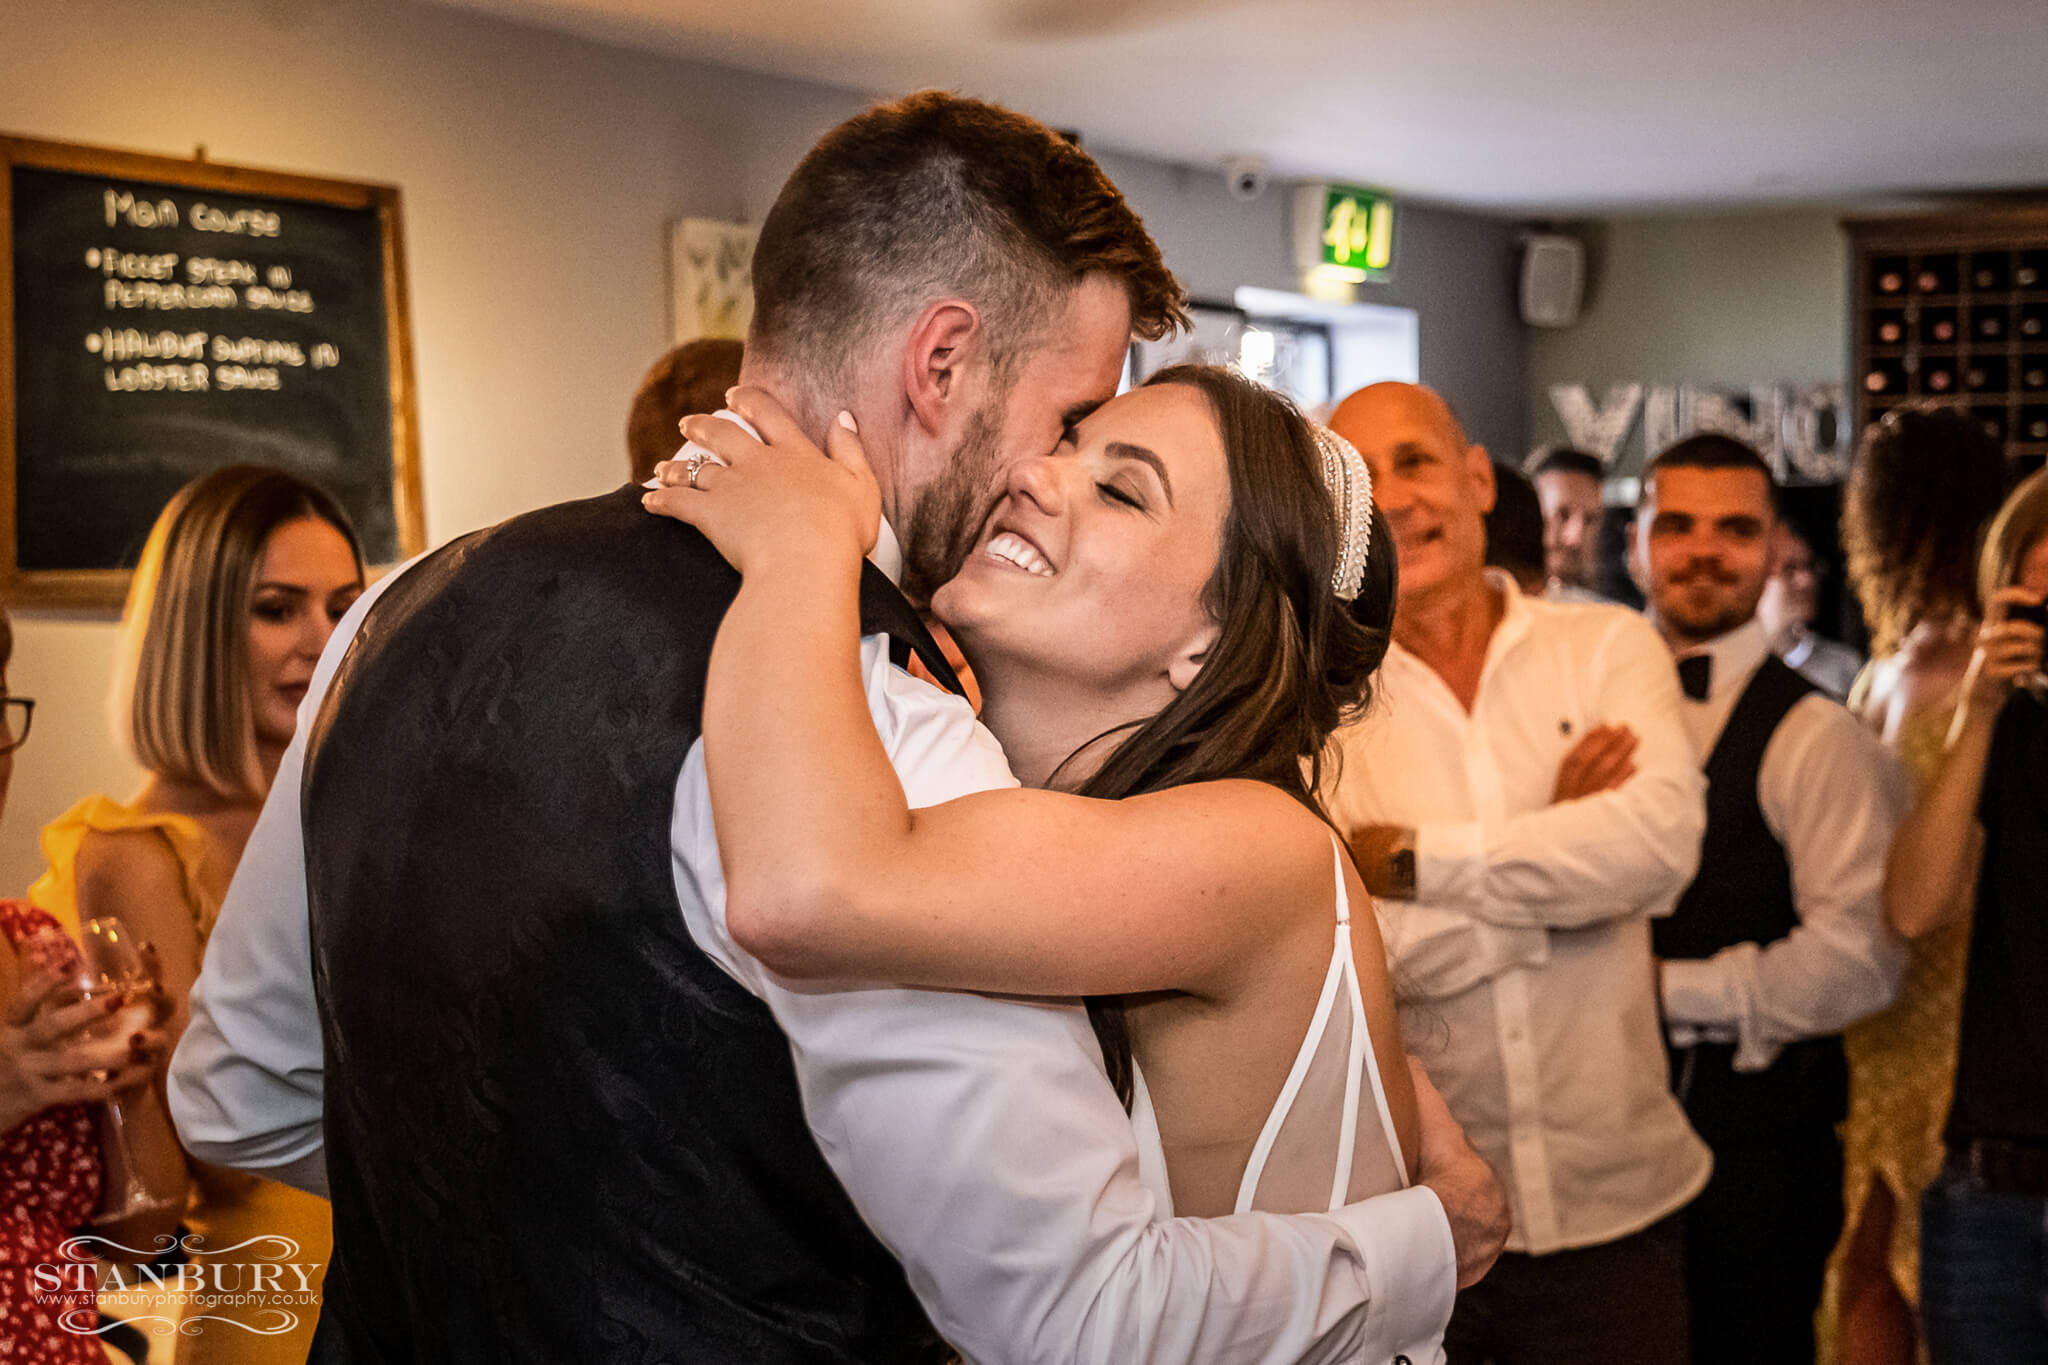 bride-groom-first-dance-stanbury-photography